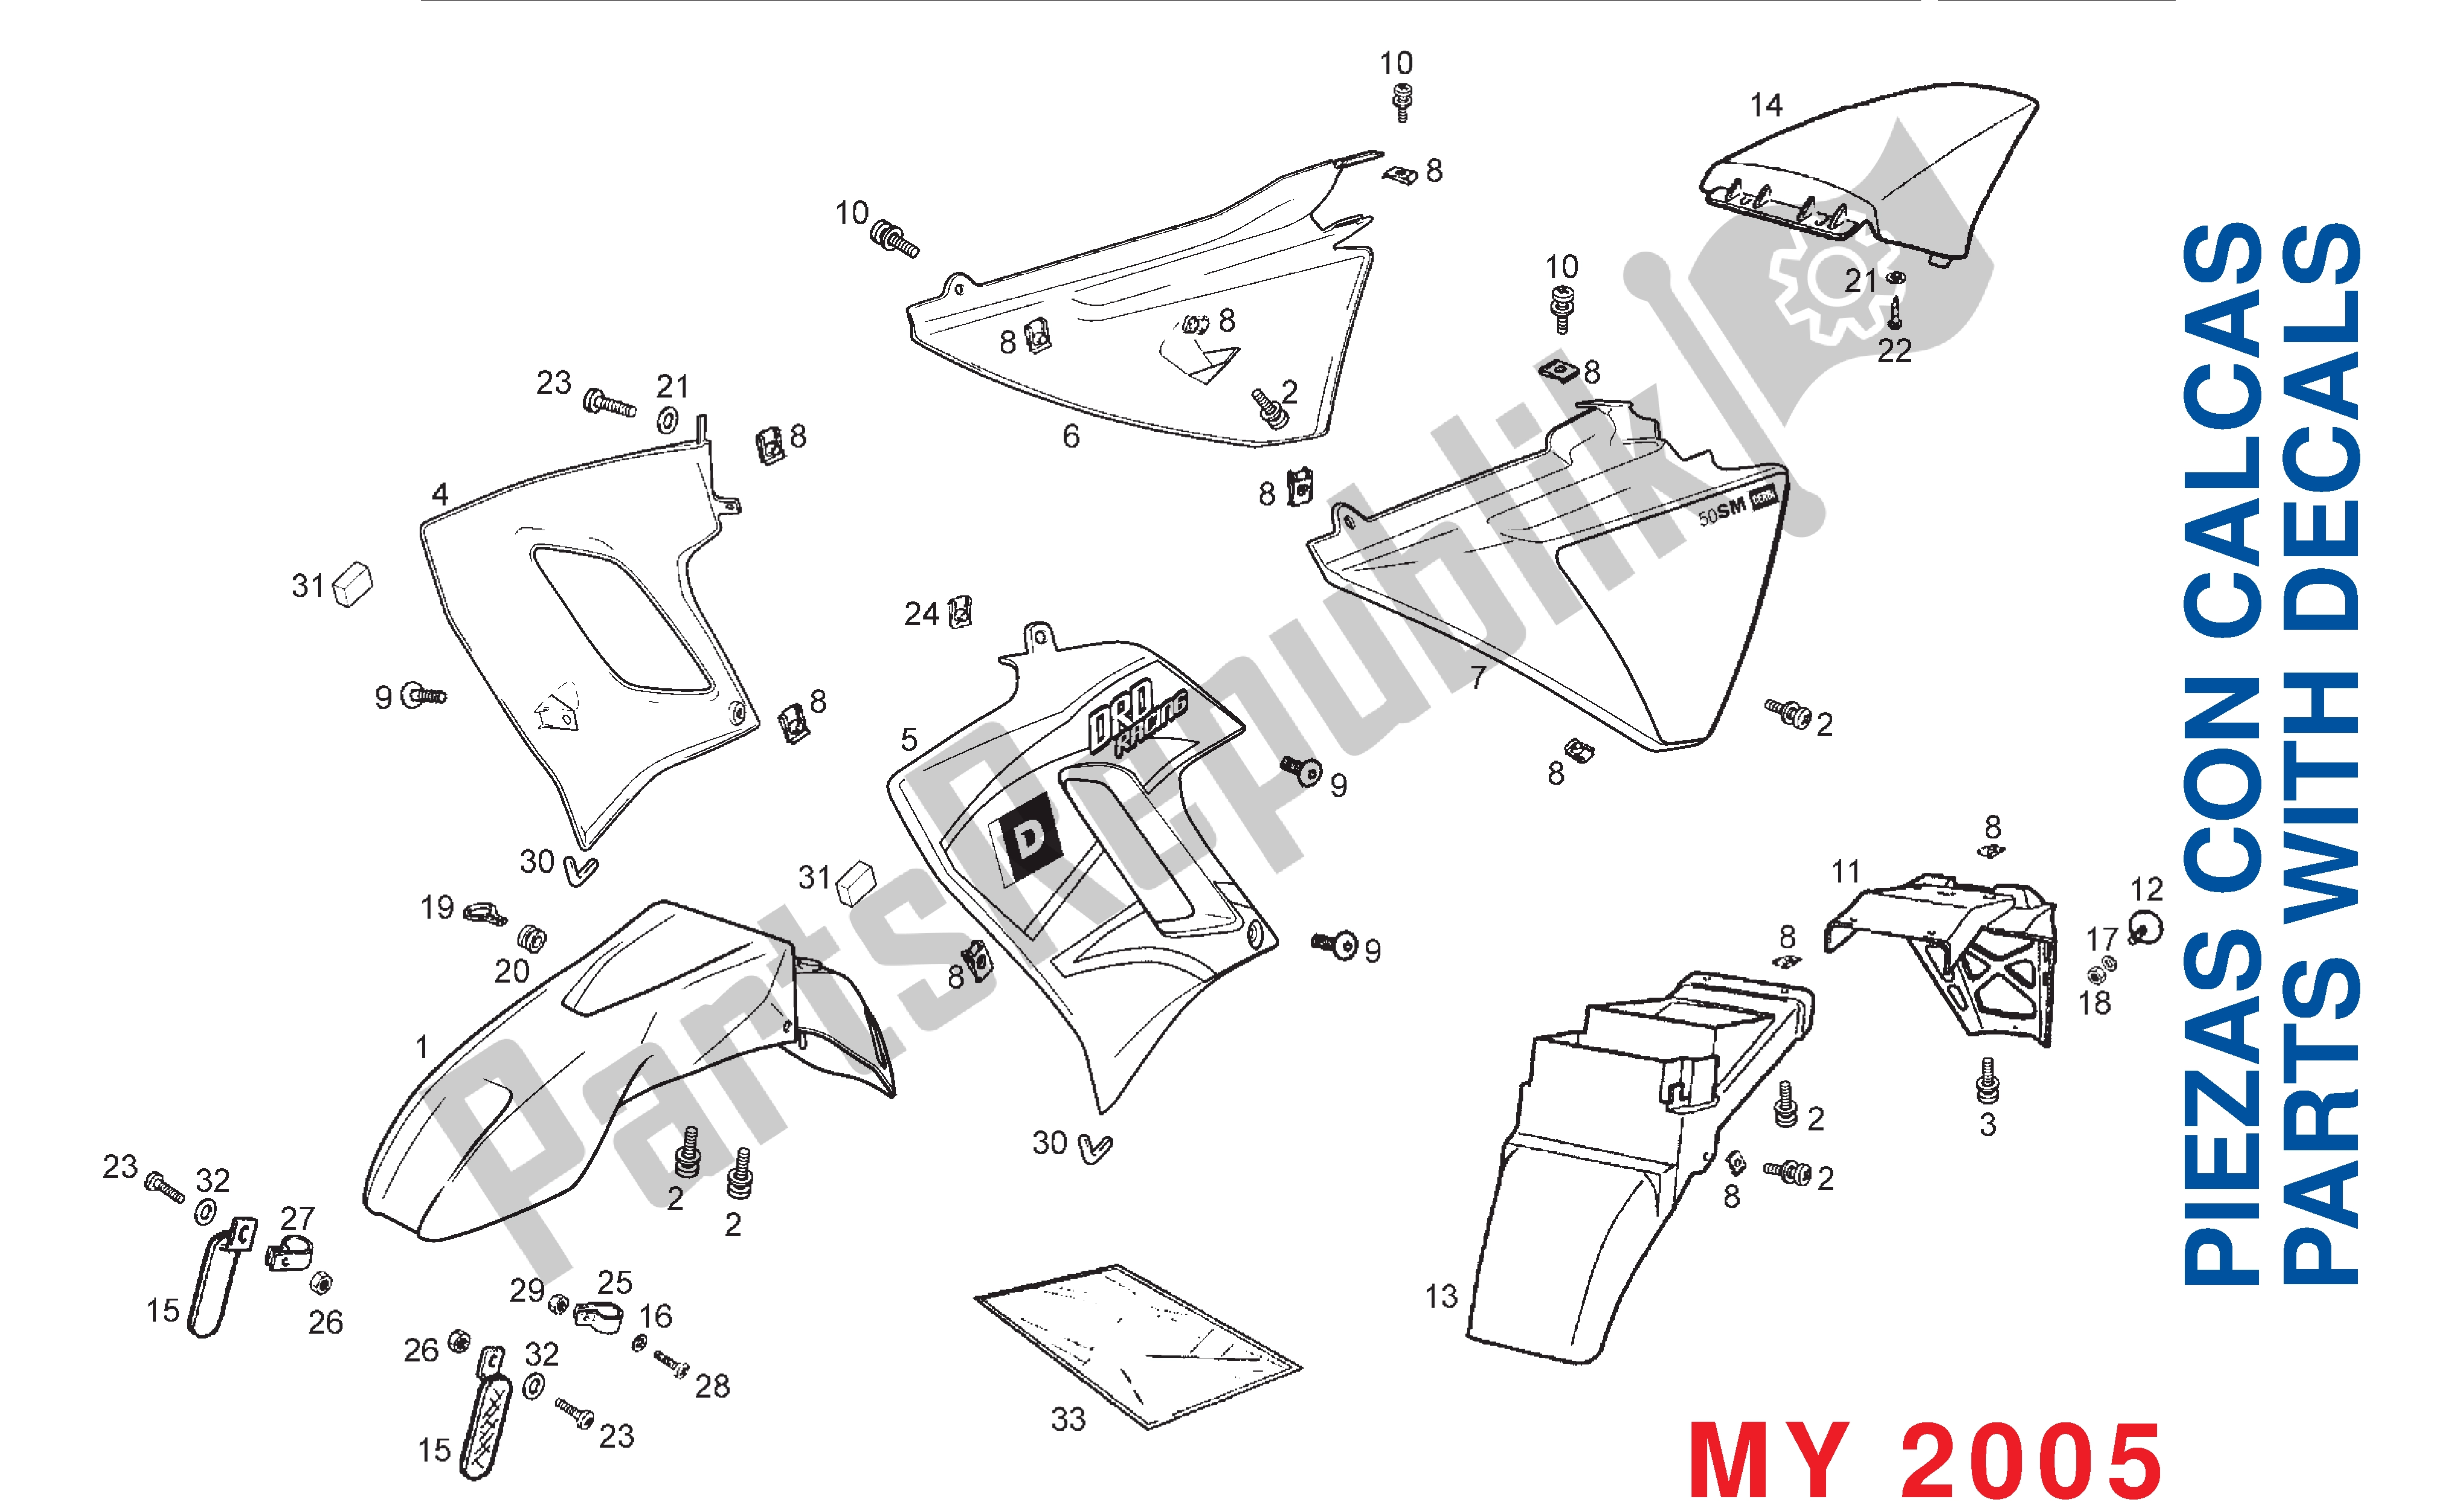 All parts for the Chassis Components (2005 Model) of the Derbi Senda DRD SM 50 2005 - 2008